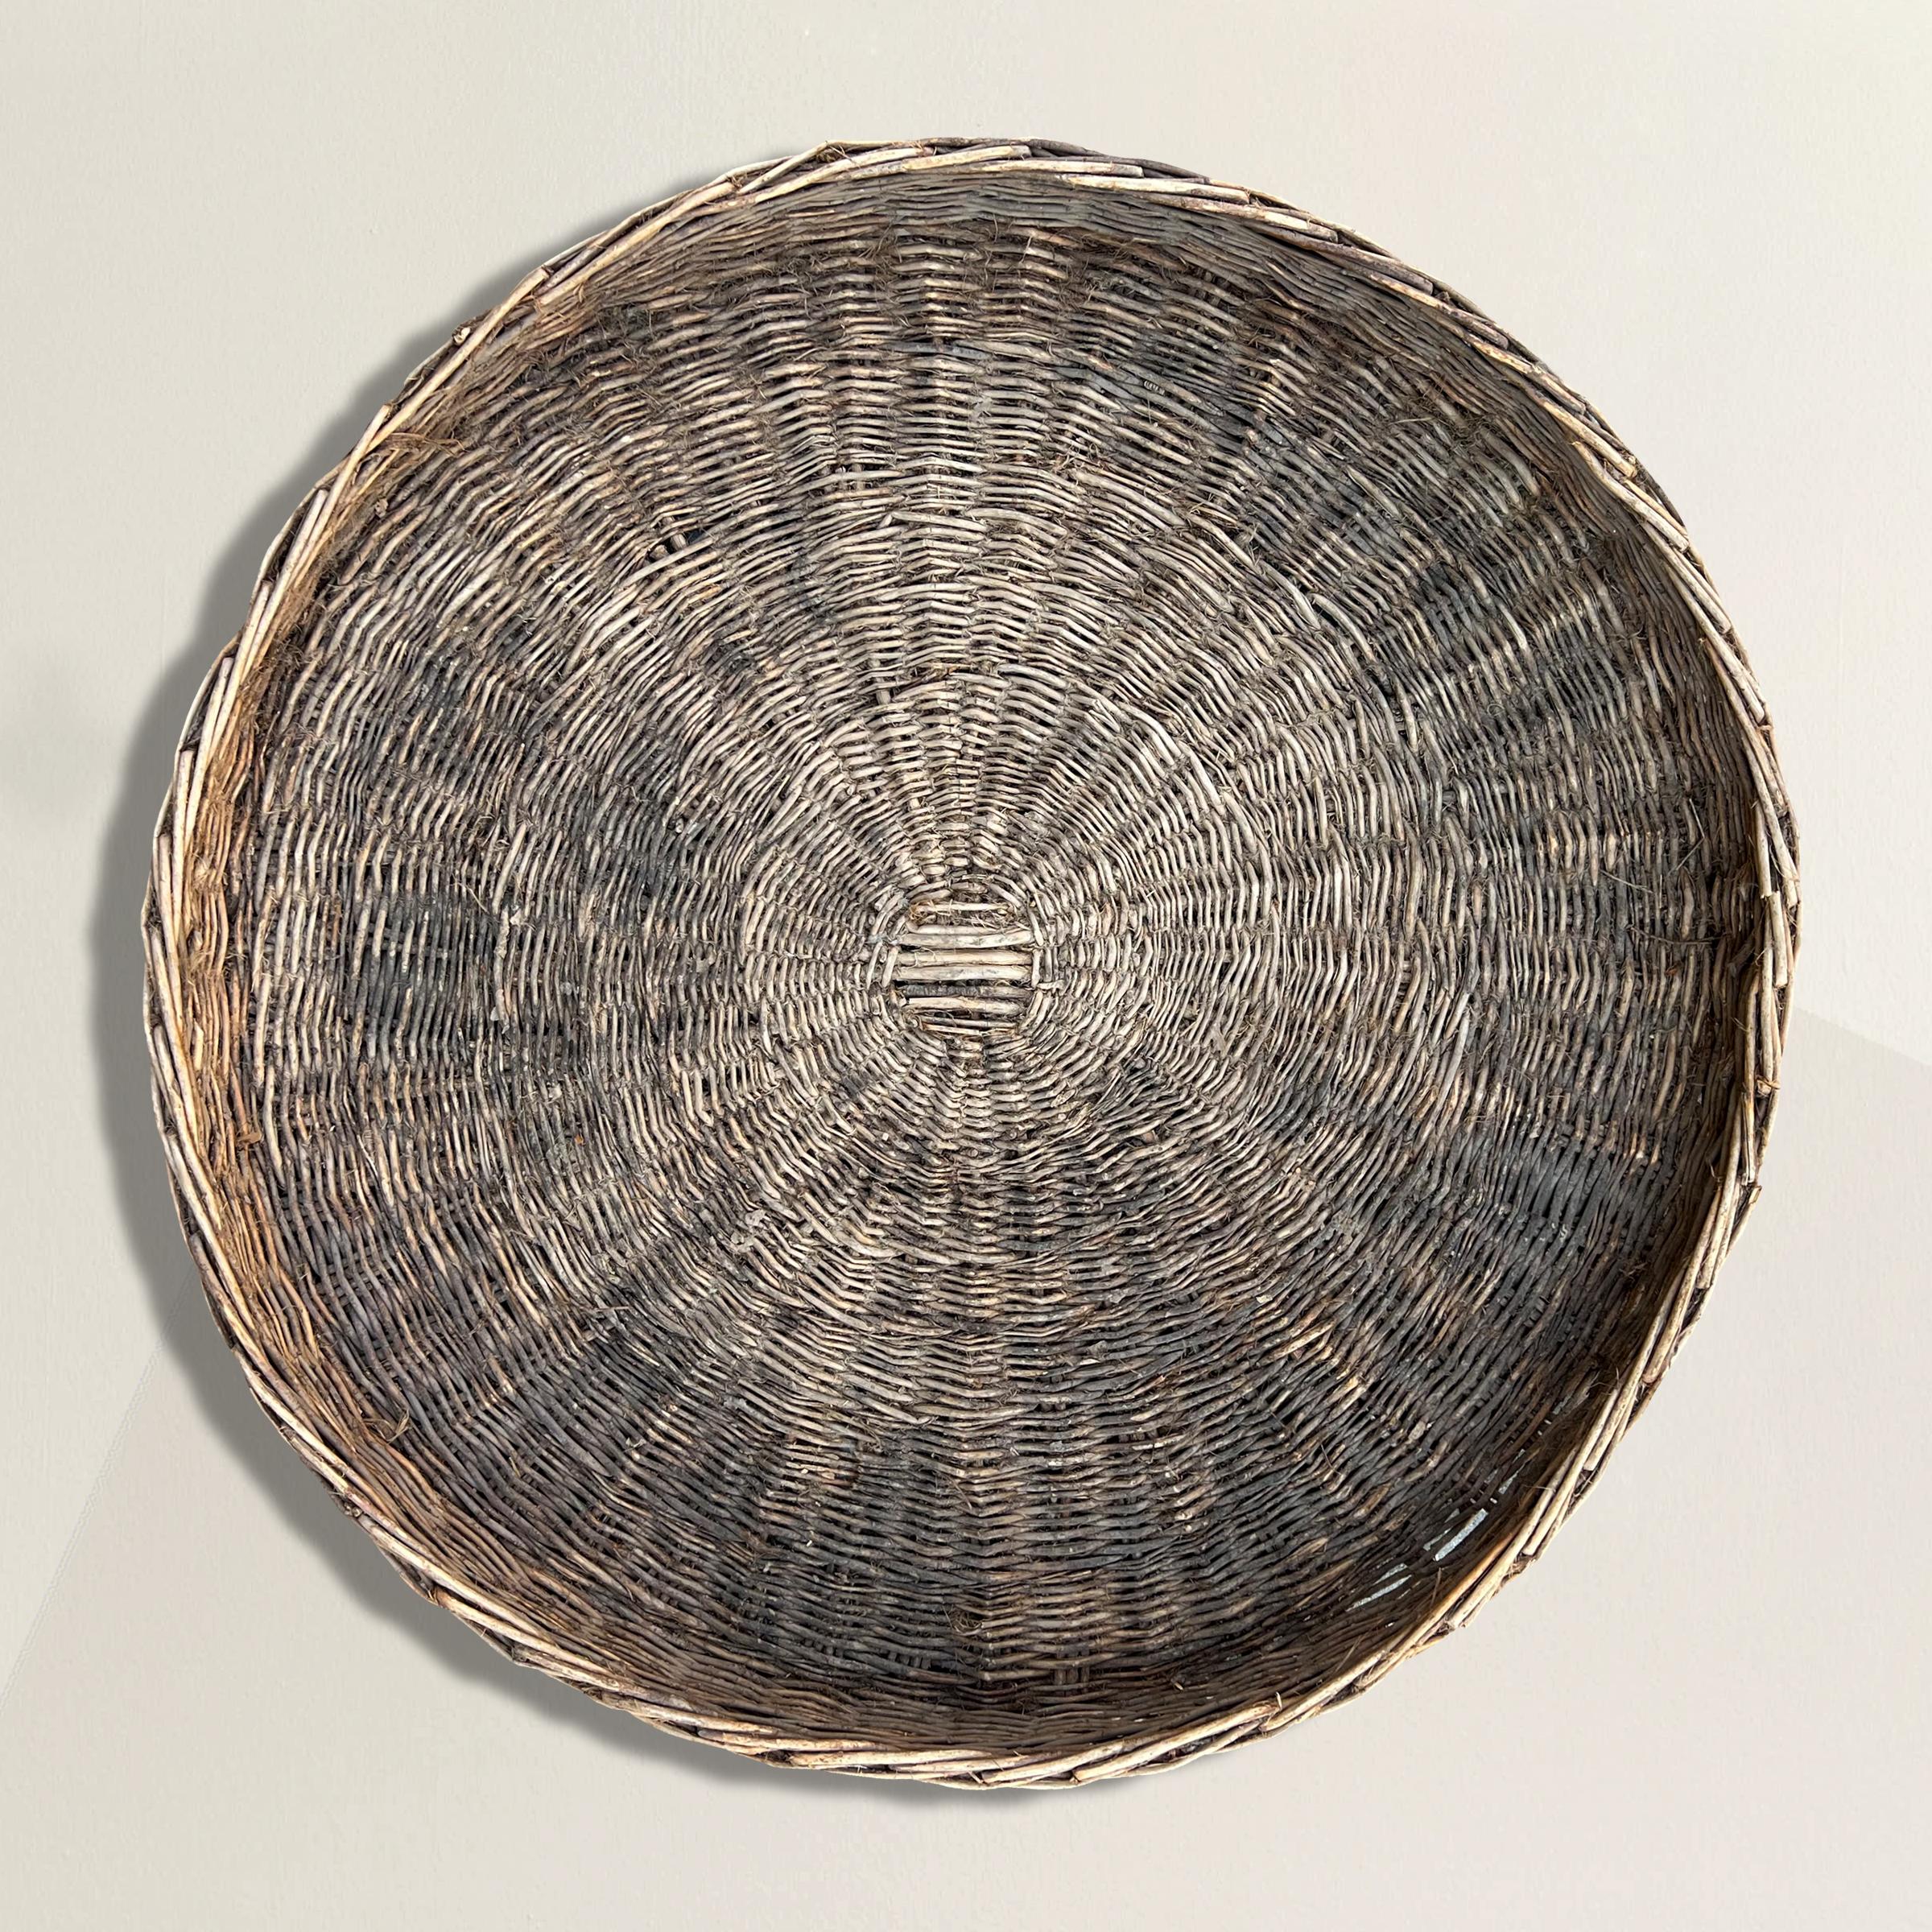 A stunning late 19th century French hand-woven willow winnowing basket with a wonderful patina. Winnowing, in its simplest form, involves throwing wheat into the air allowing the lighter chaff to blow away and leaving the heavier grains to fall back